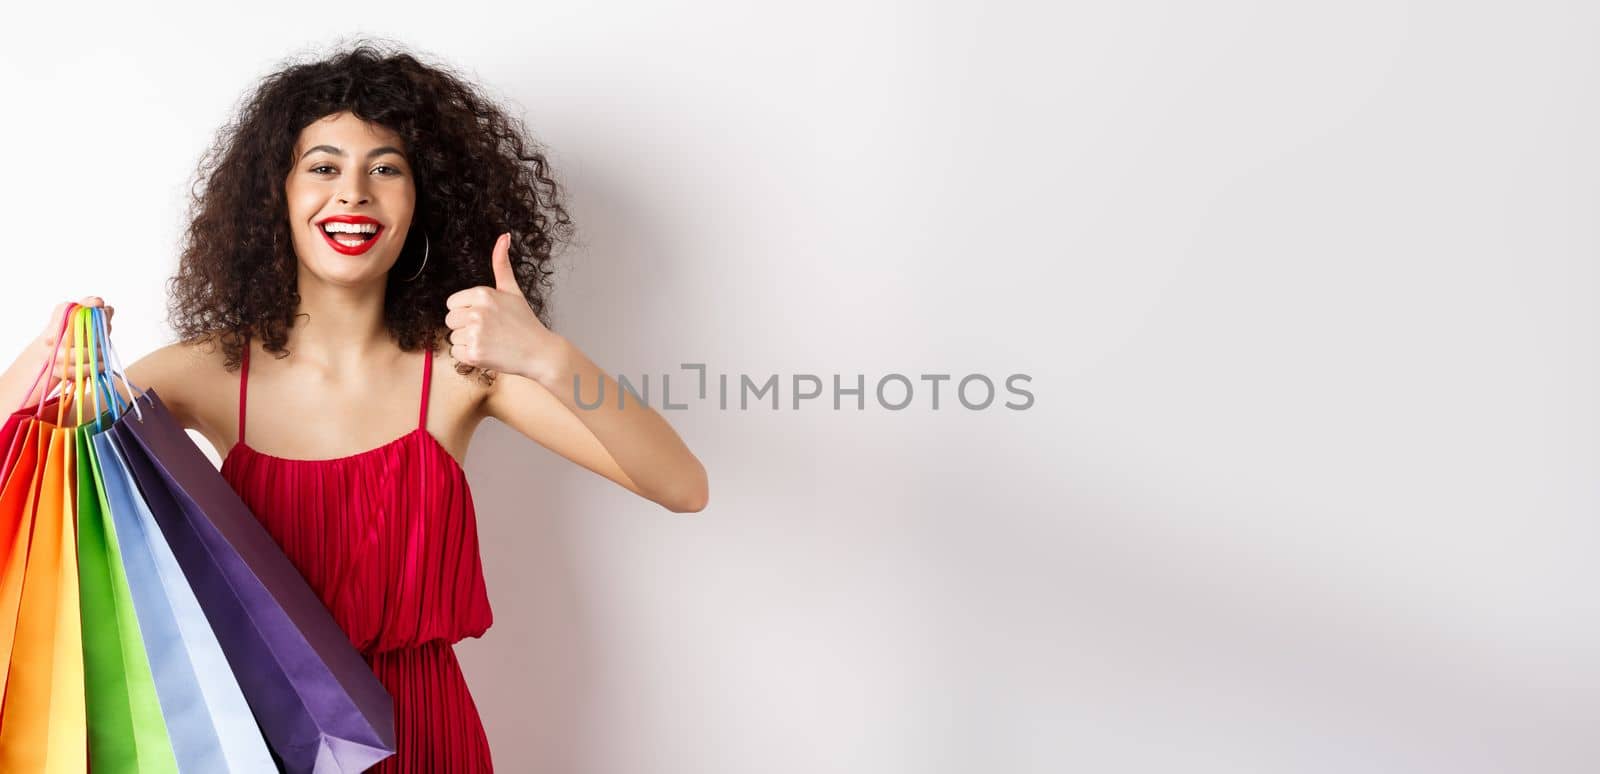 Fashionable woman in red dress going shopping, holding bags and showing thumbs up, recommend store, standing on white background.